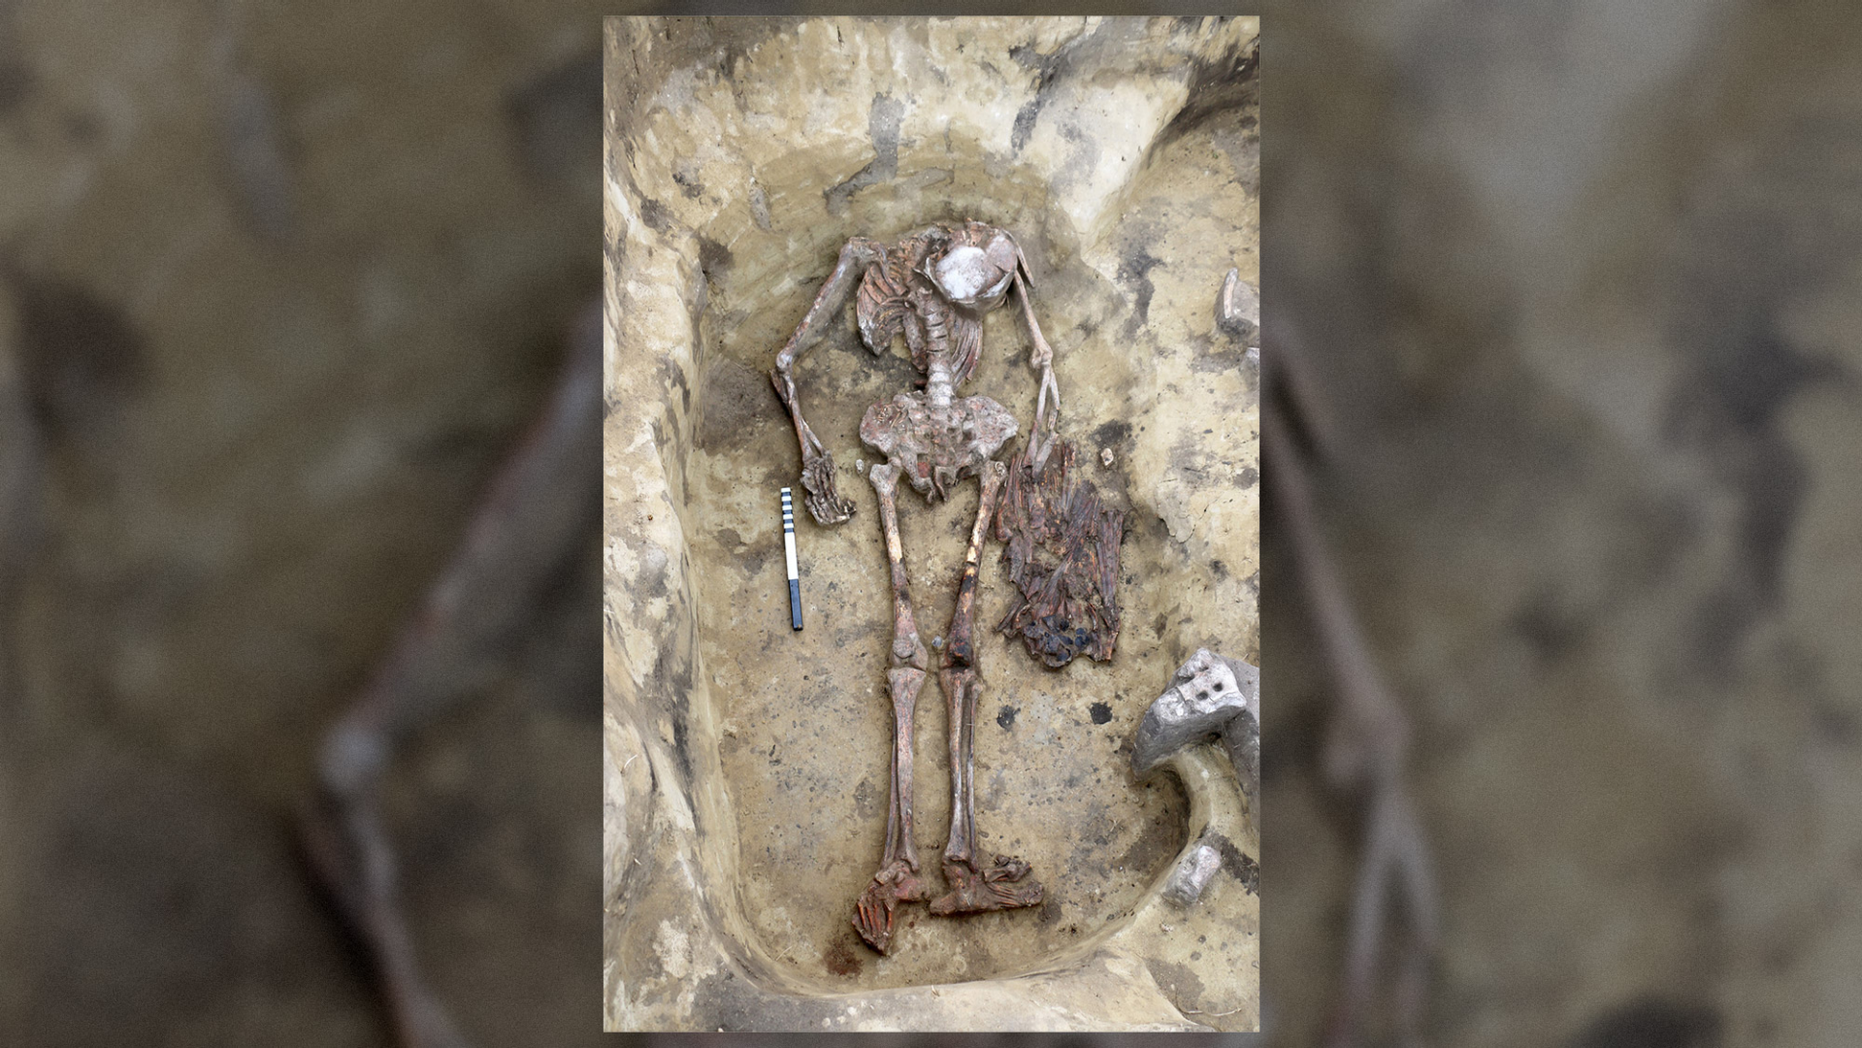 Remains of the "birdman" were found in a grave in the Ust-Tartas archeological site in Western Siberia and date to the Bronze Age.